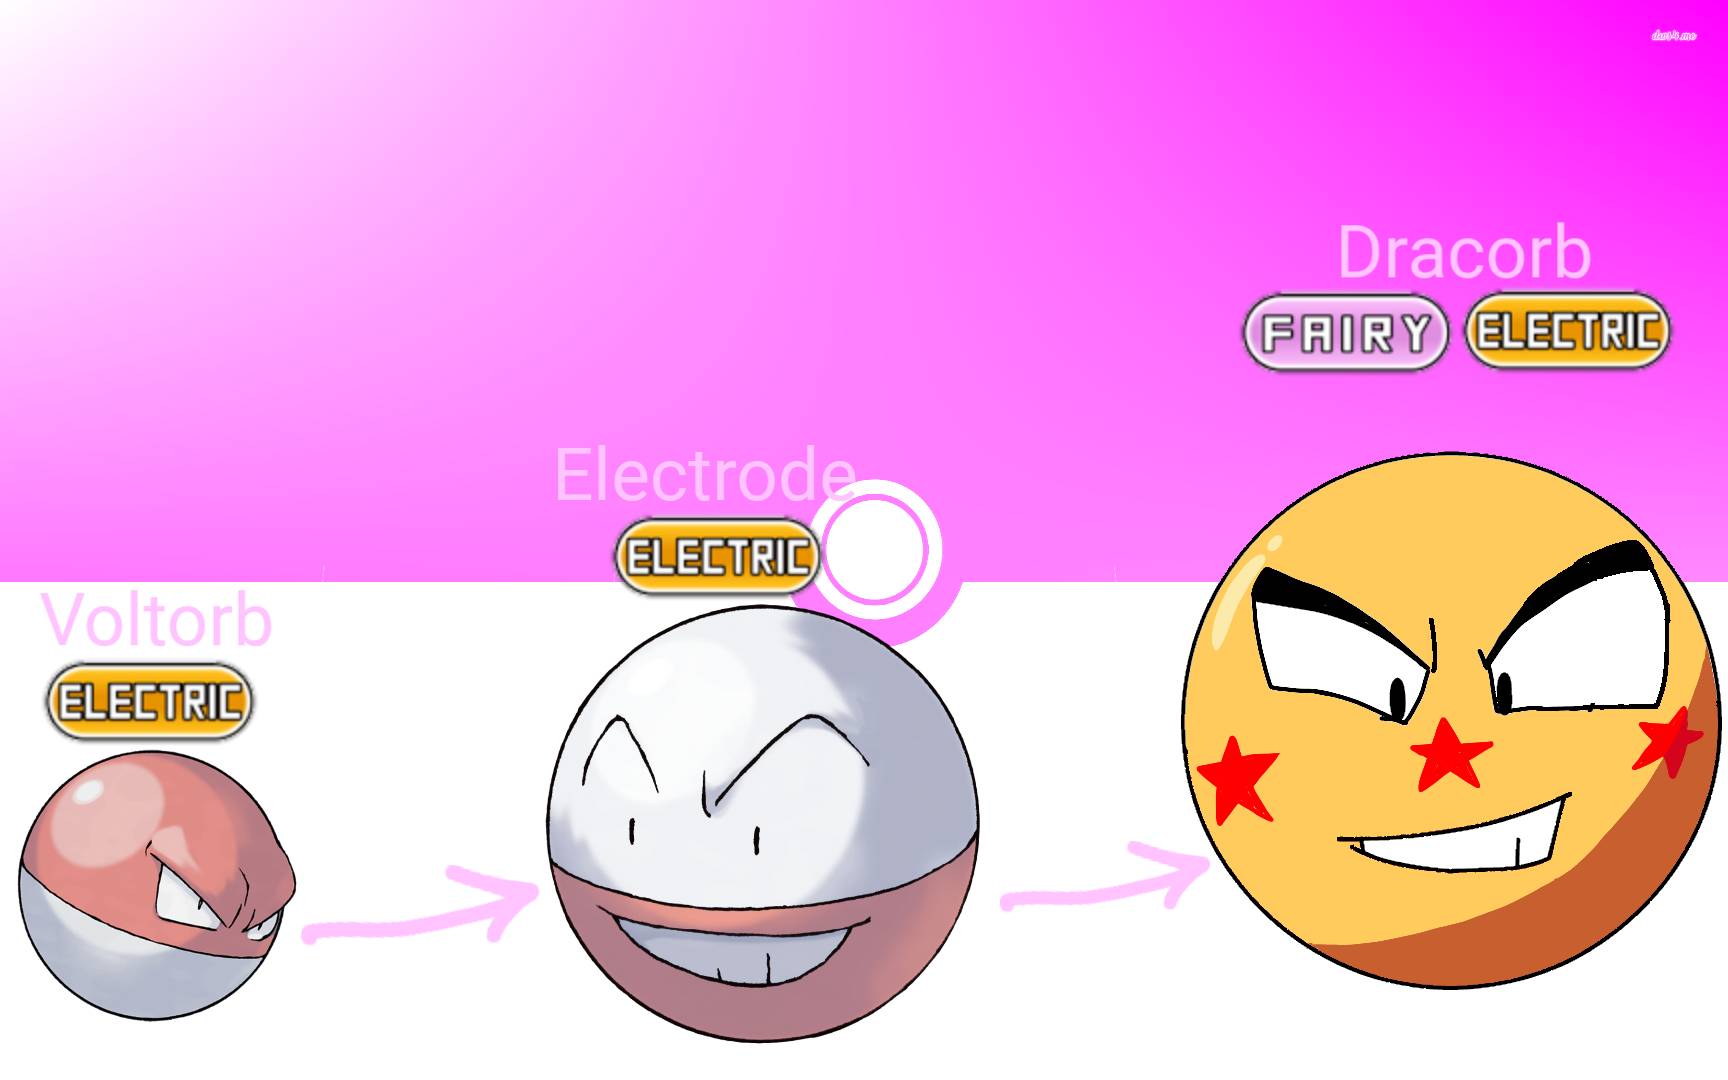 Voltorb and Electrode by Percyfan94 on DeviantArt